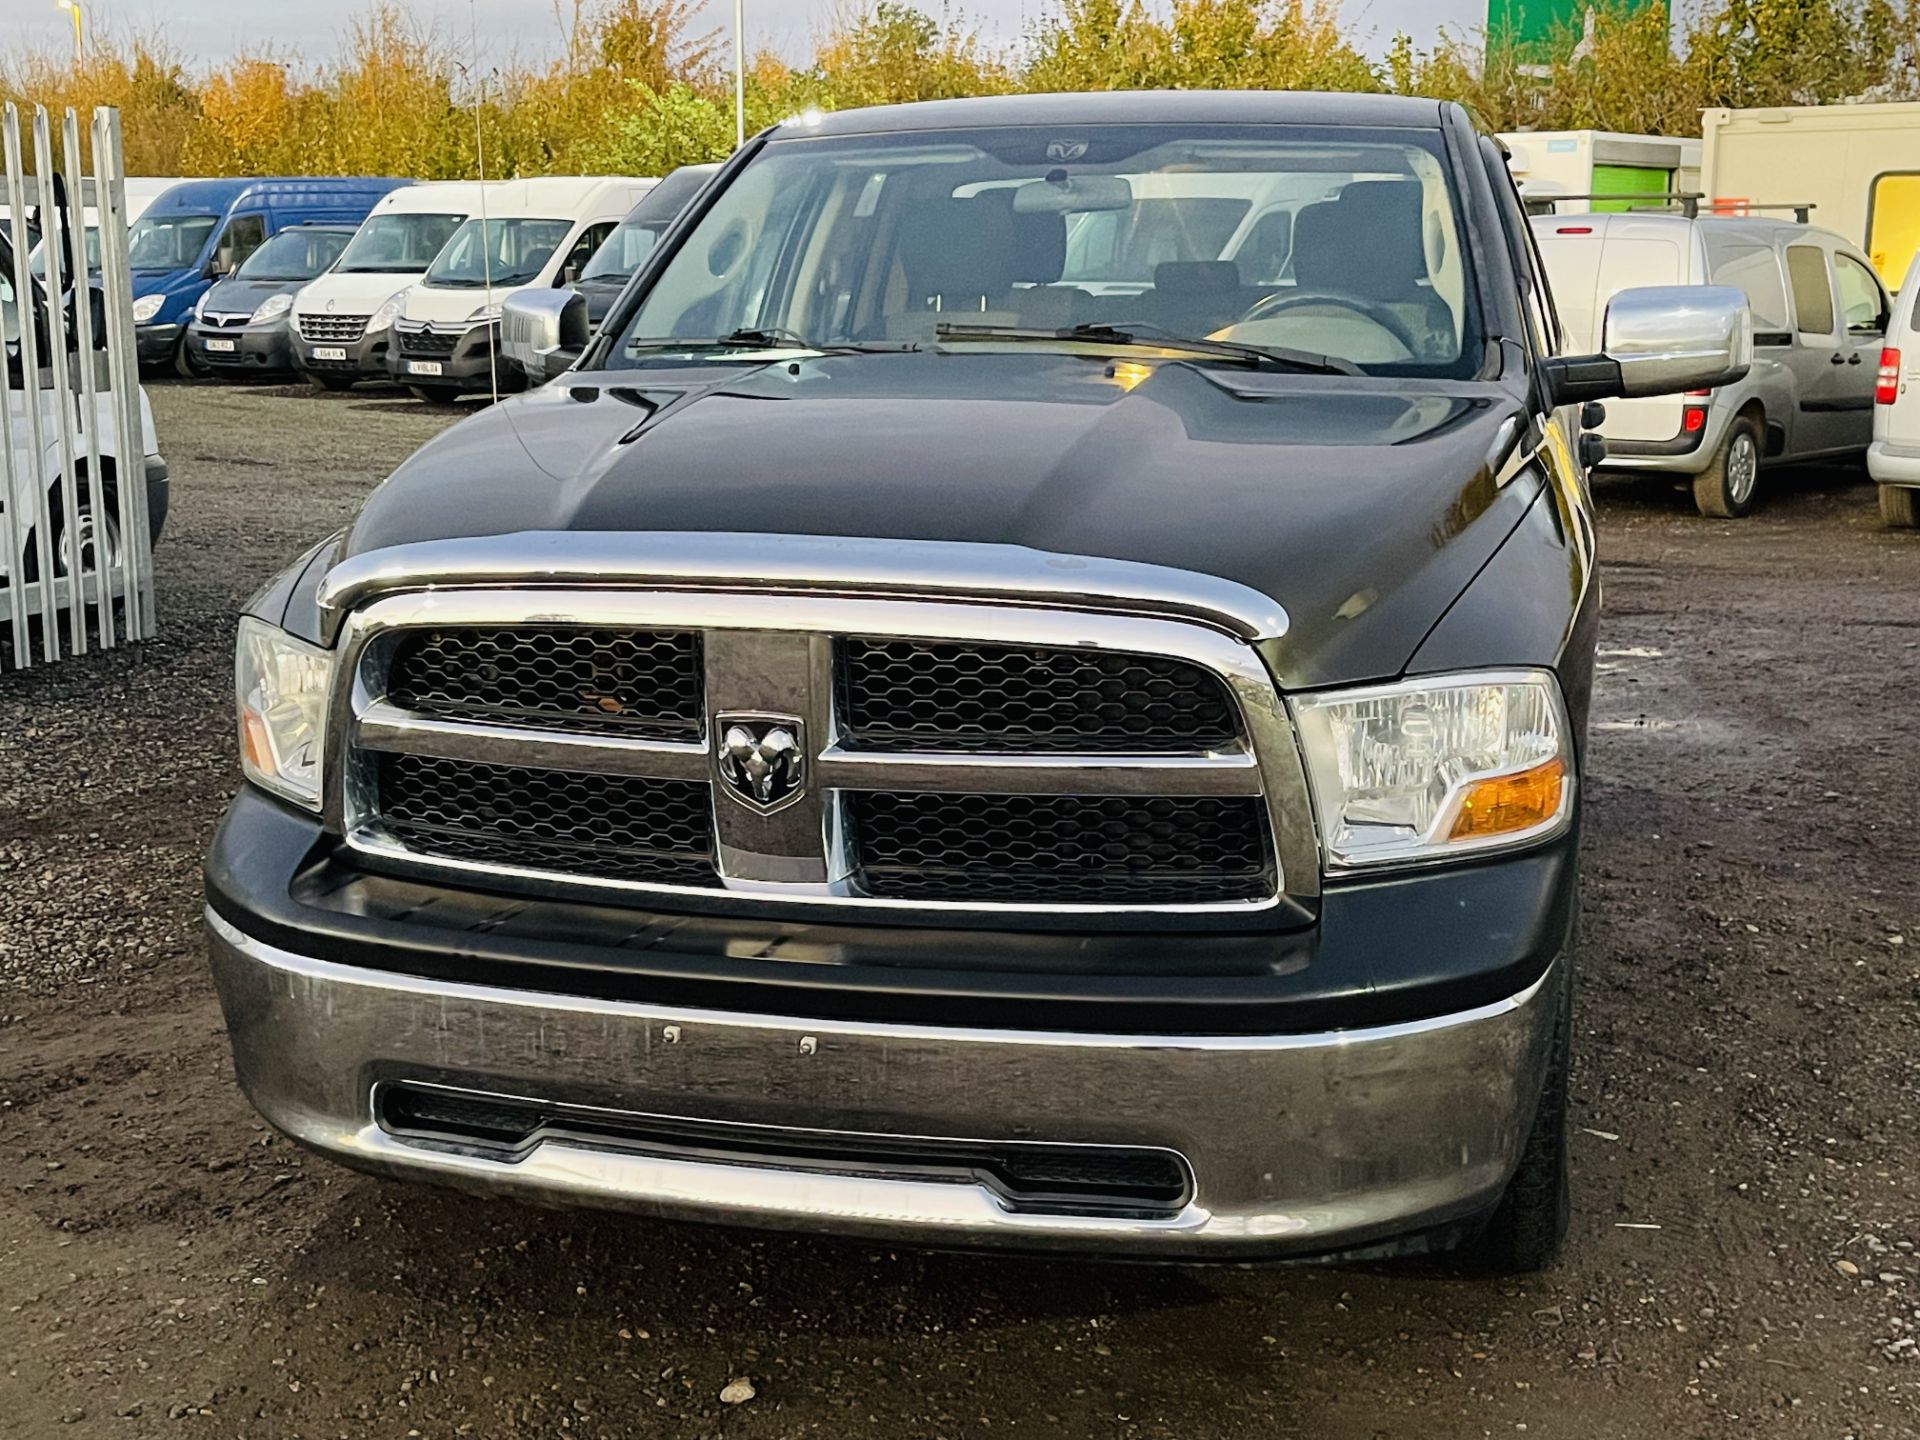 Dodge Ram 4.7 V8 1500 ST 4WD ' 2012 Year ' A/C - Cruise Control - 6 Seats - Image 4 of 27